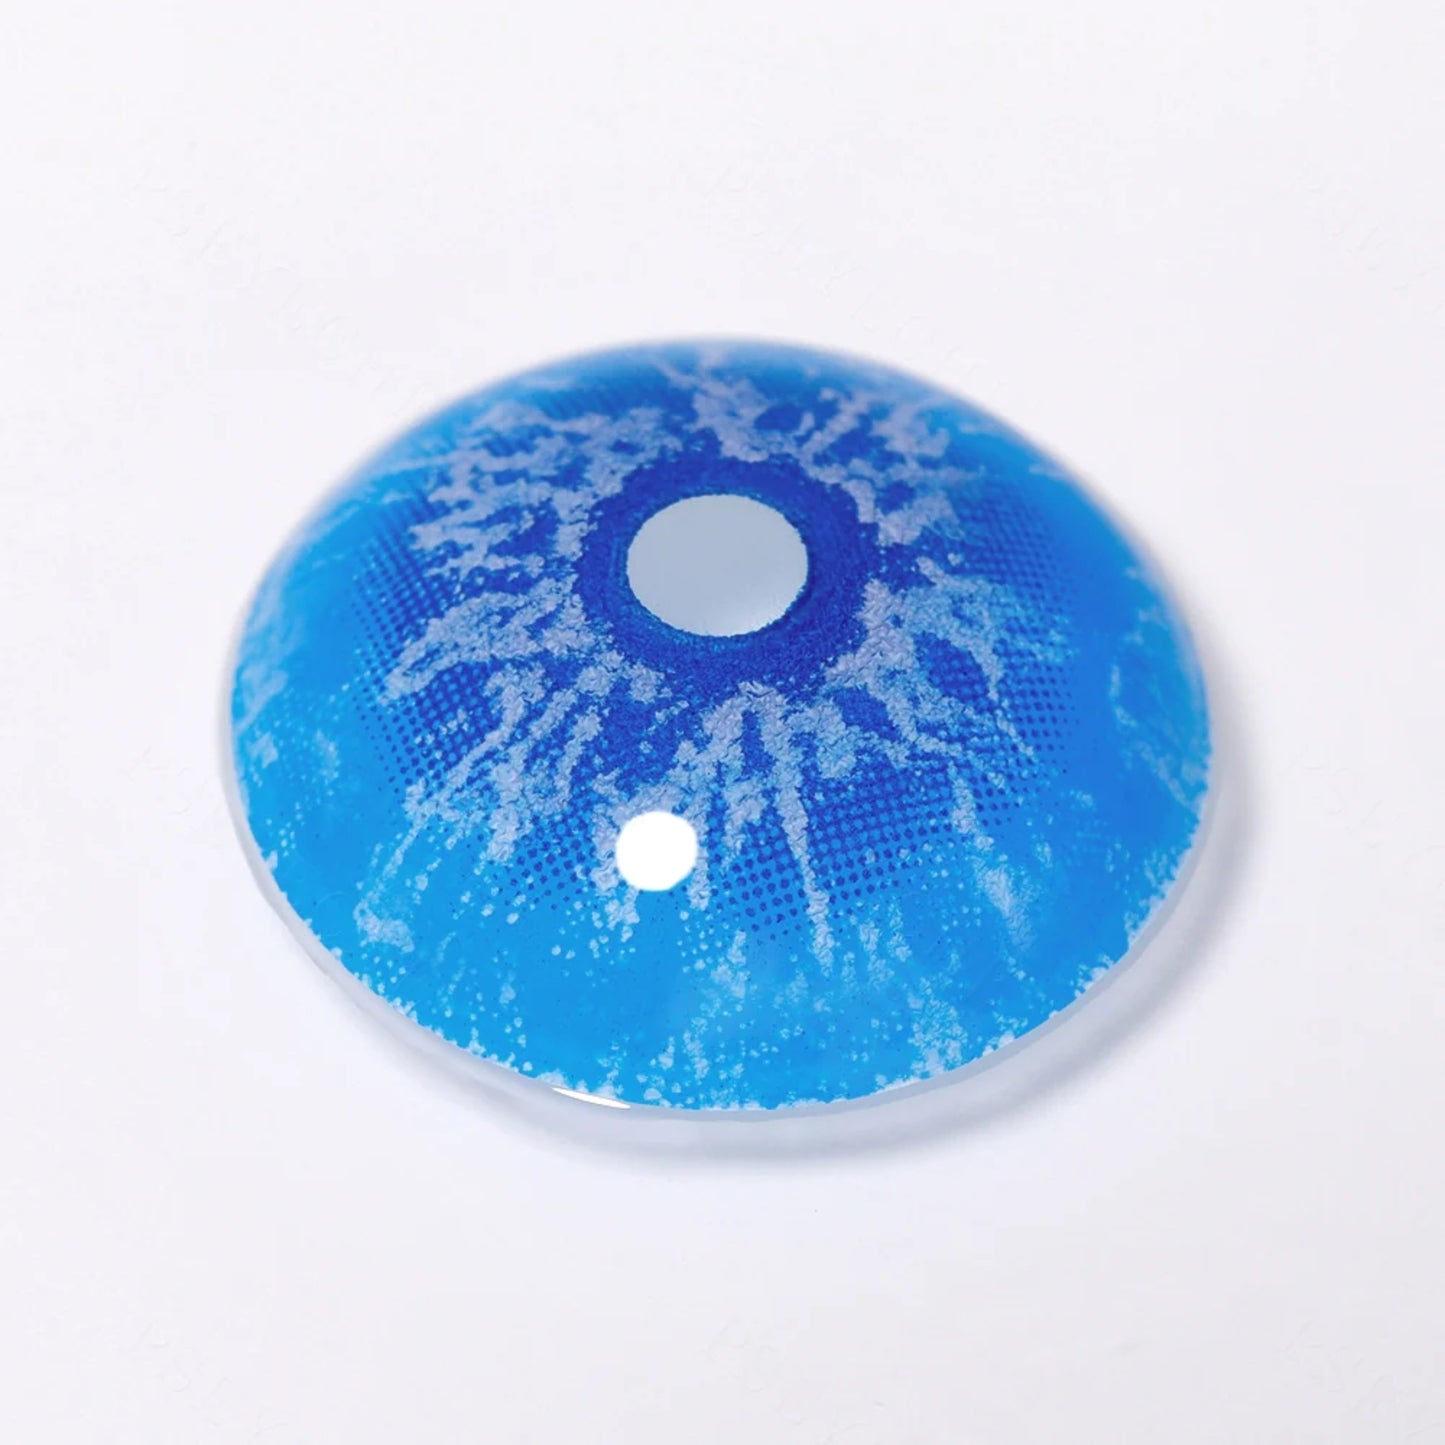 17mm White Walker Mini Sclera Contacts